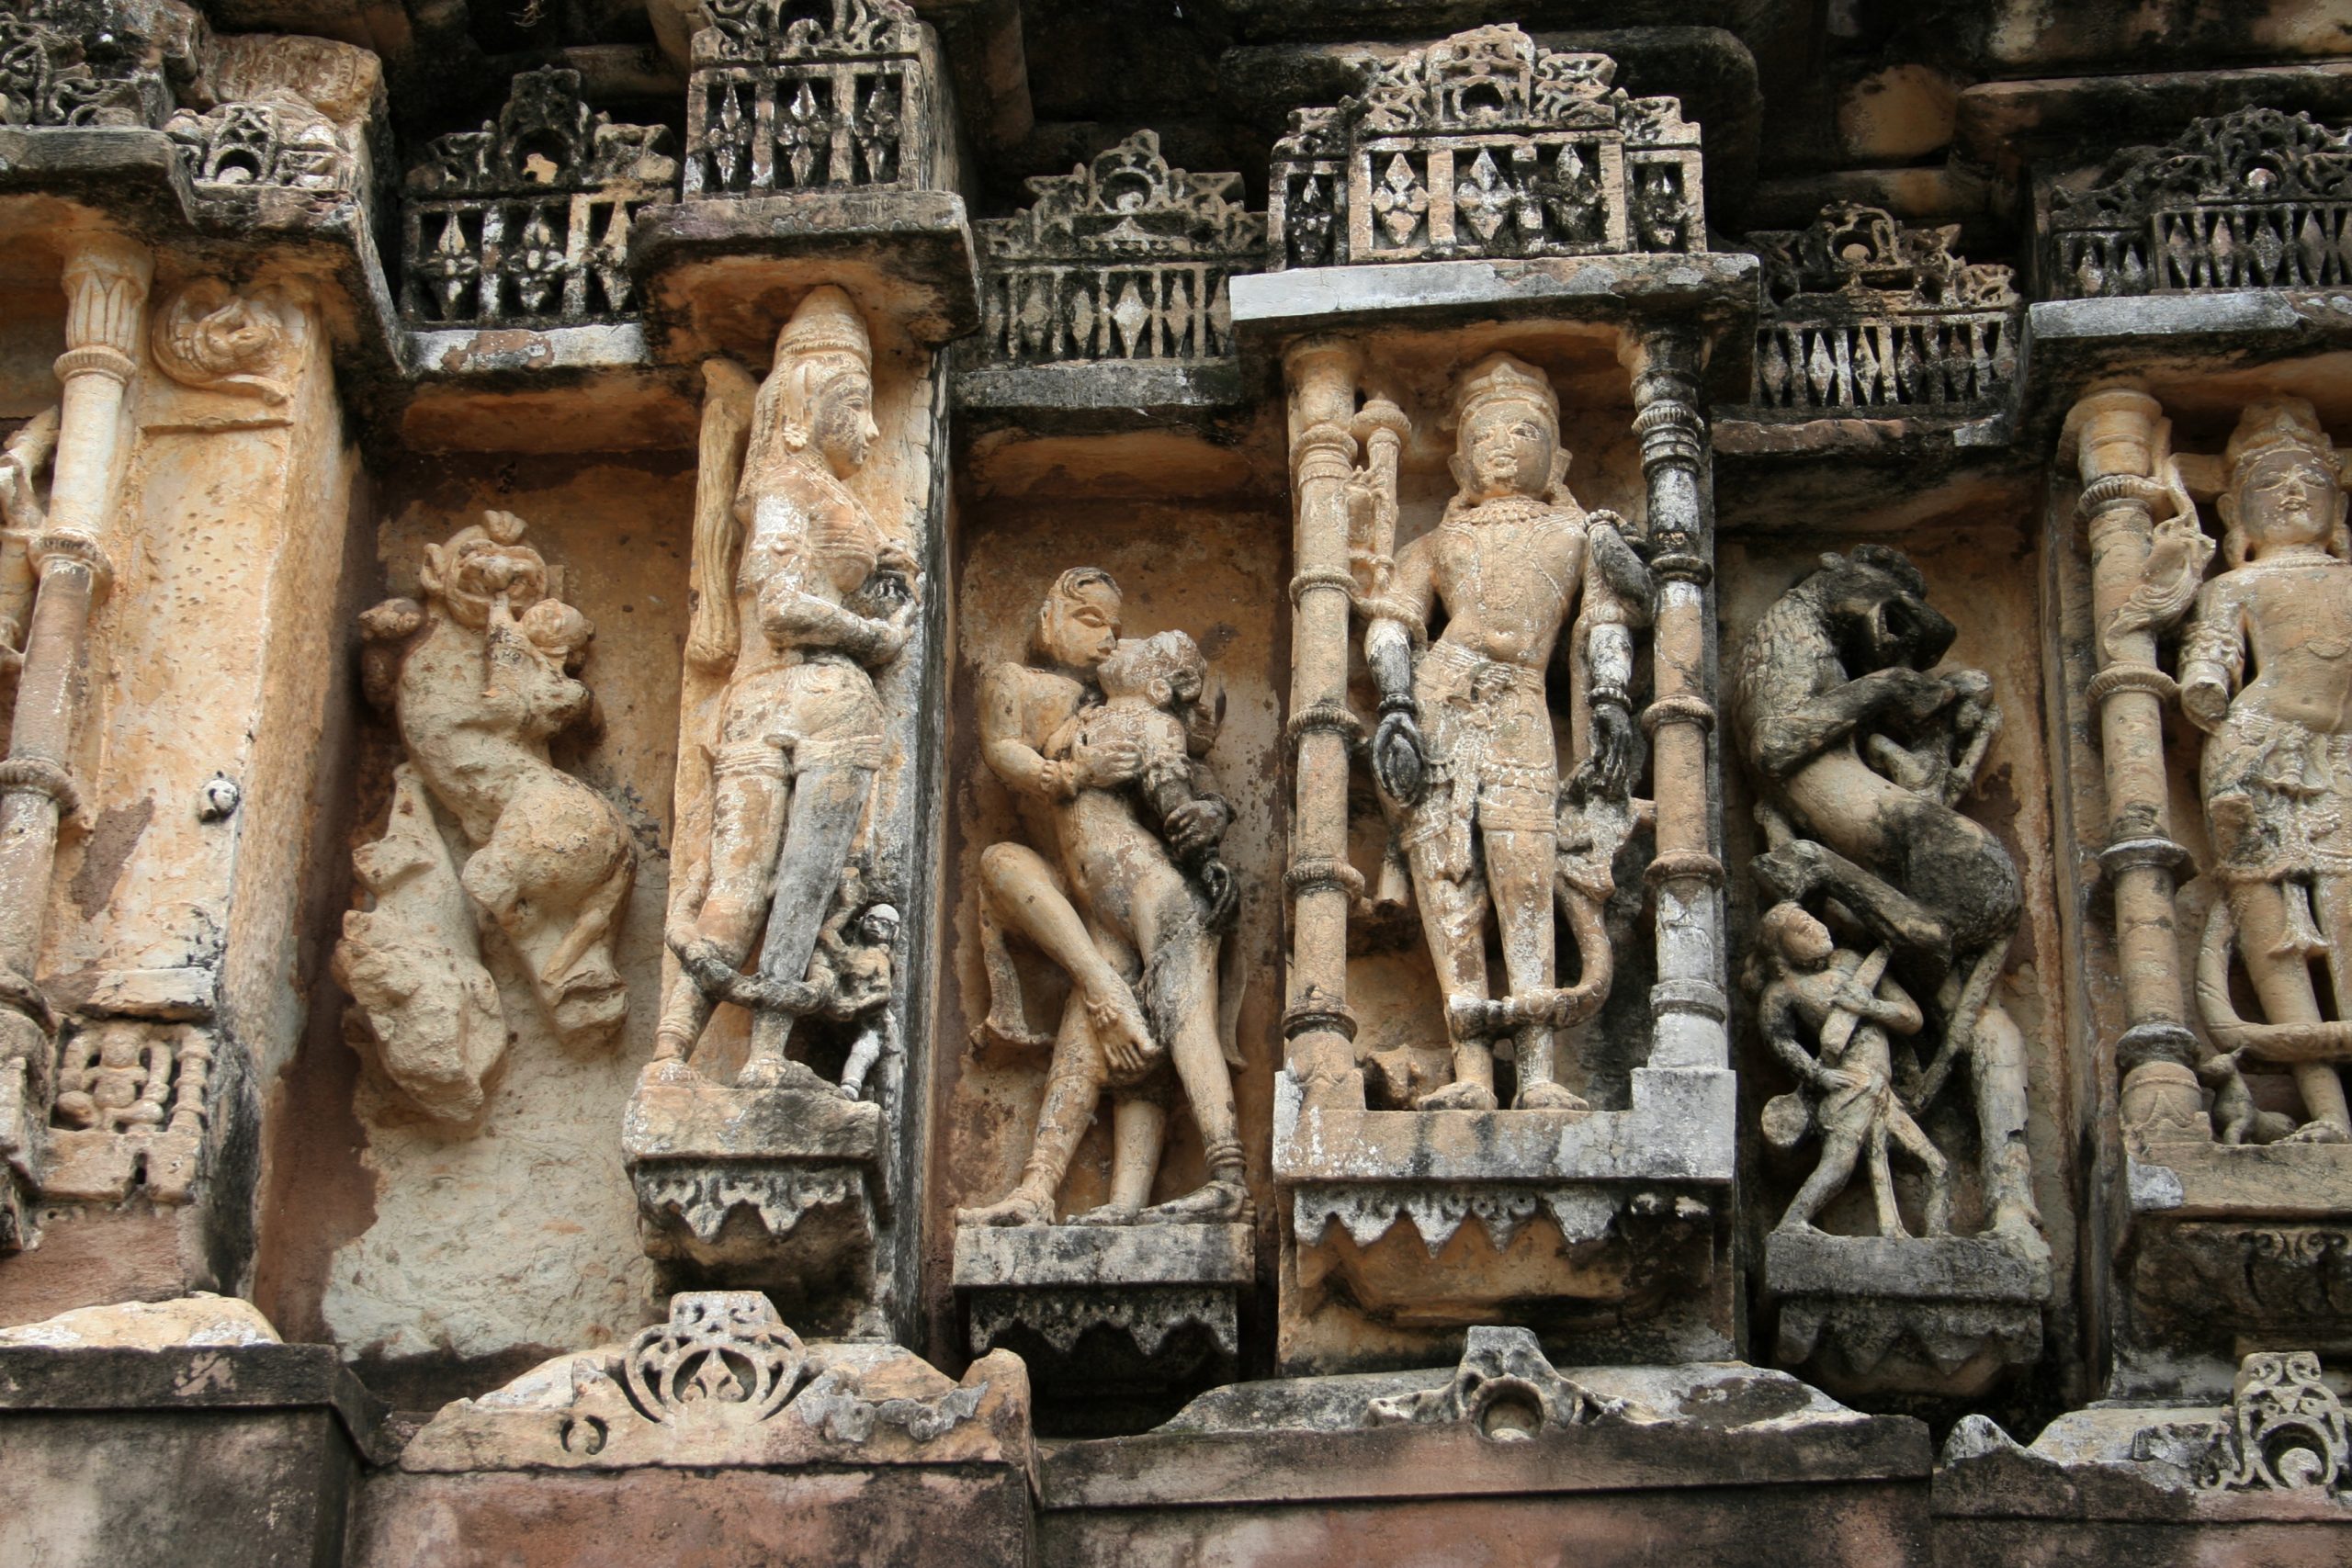 Stone carvings of deities and figures in an embrace on niches and projections of a wall.